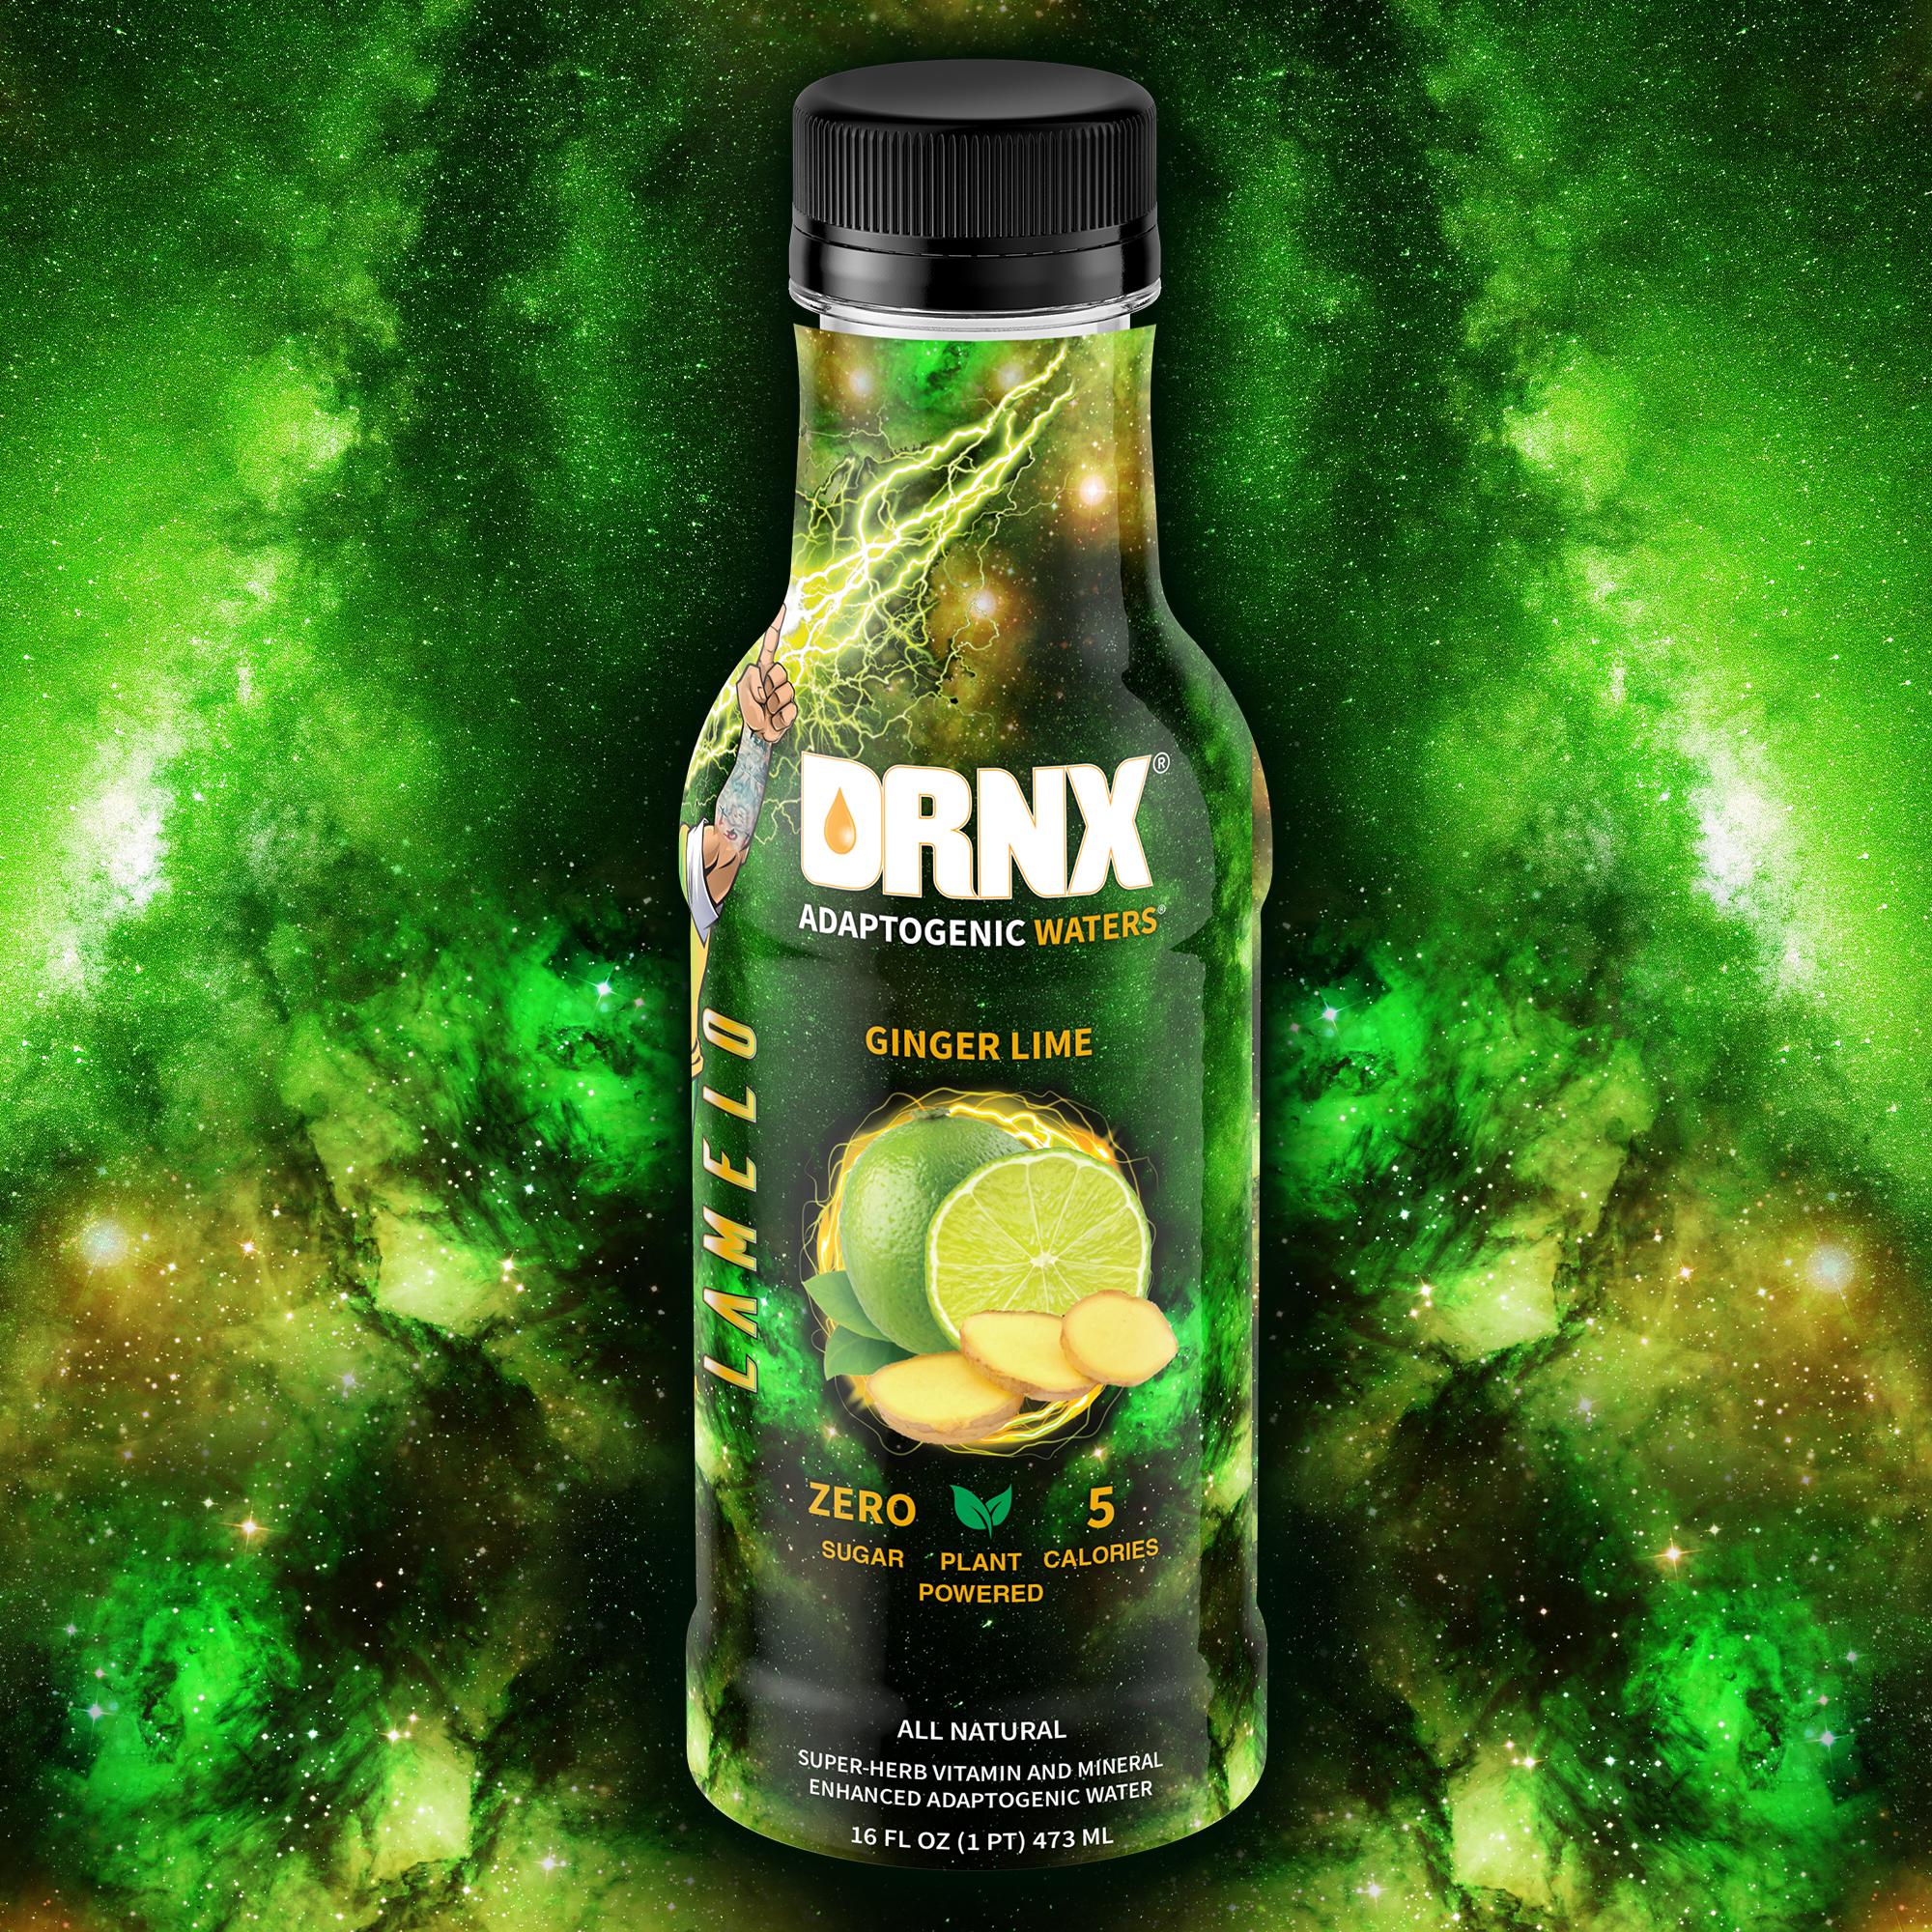 DRNX Adaptogenic Waters - Ginger Lime - 12 Case